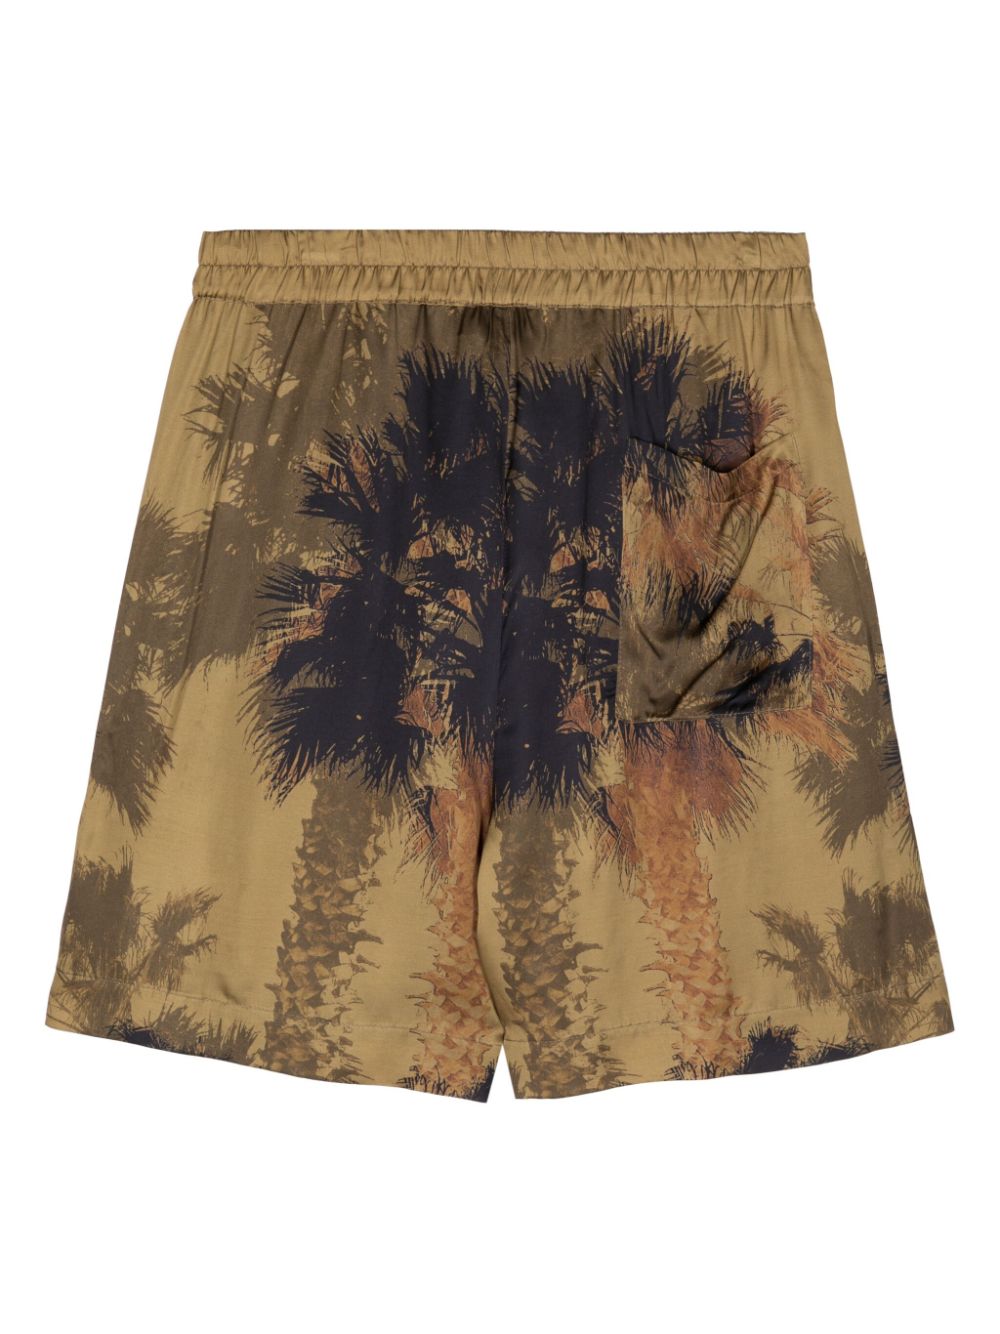 Green shorts with Palm print